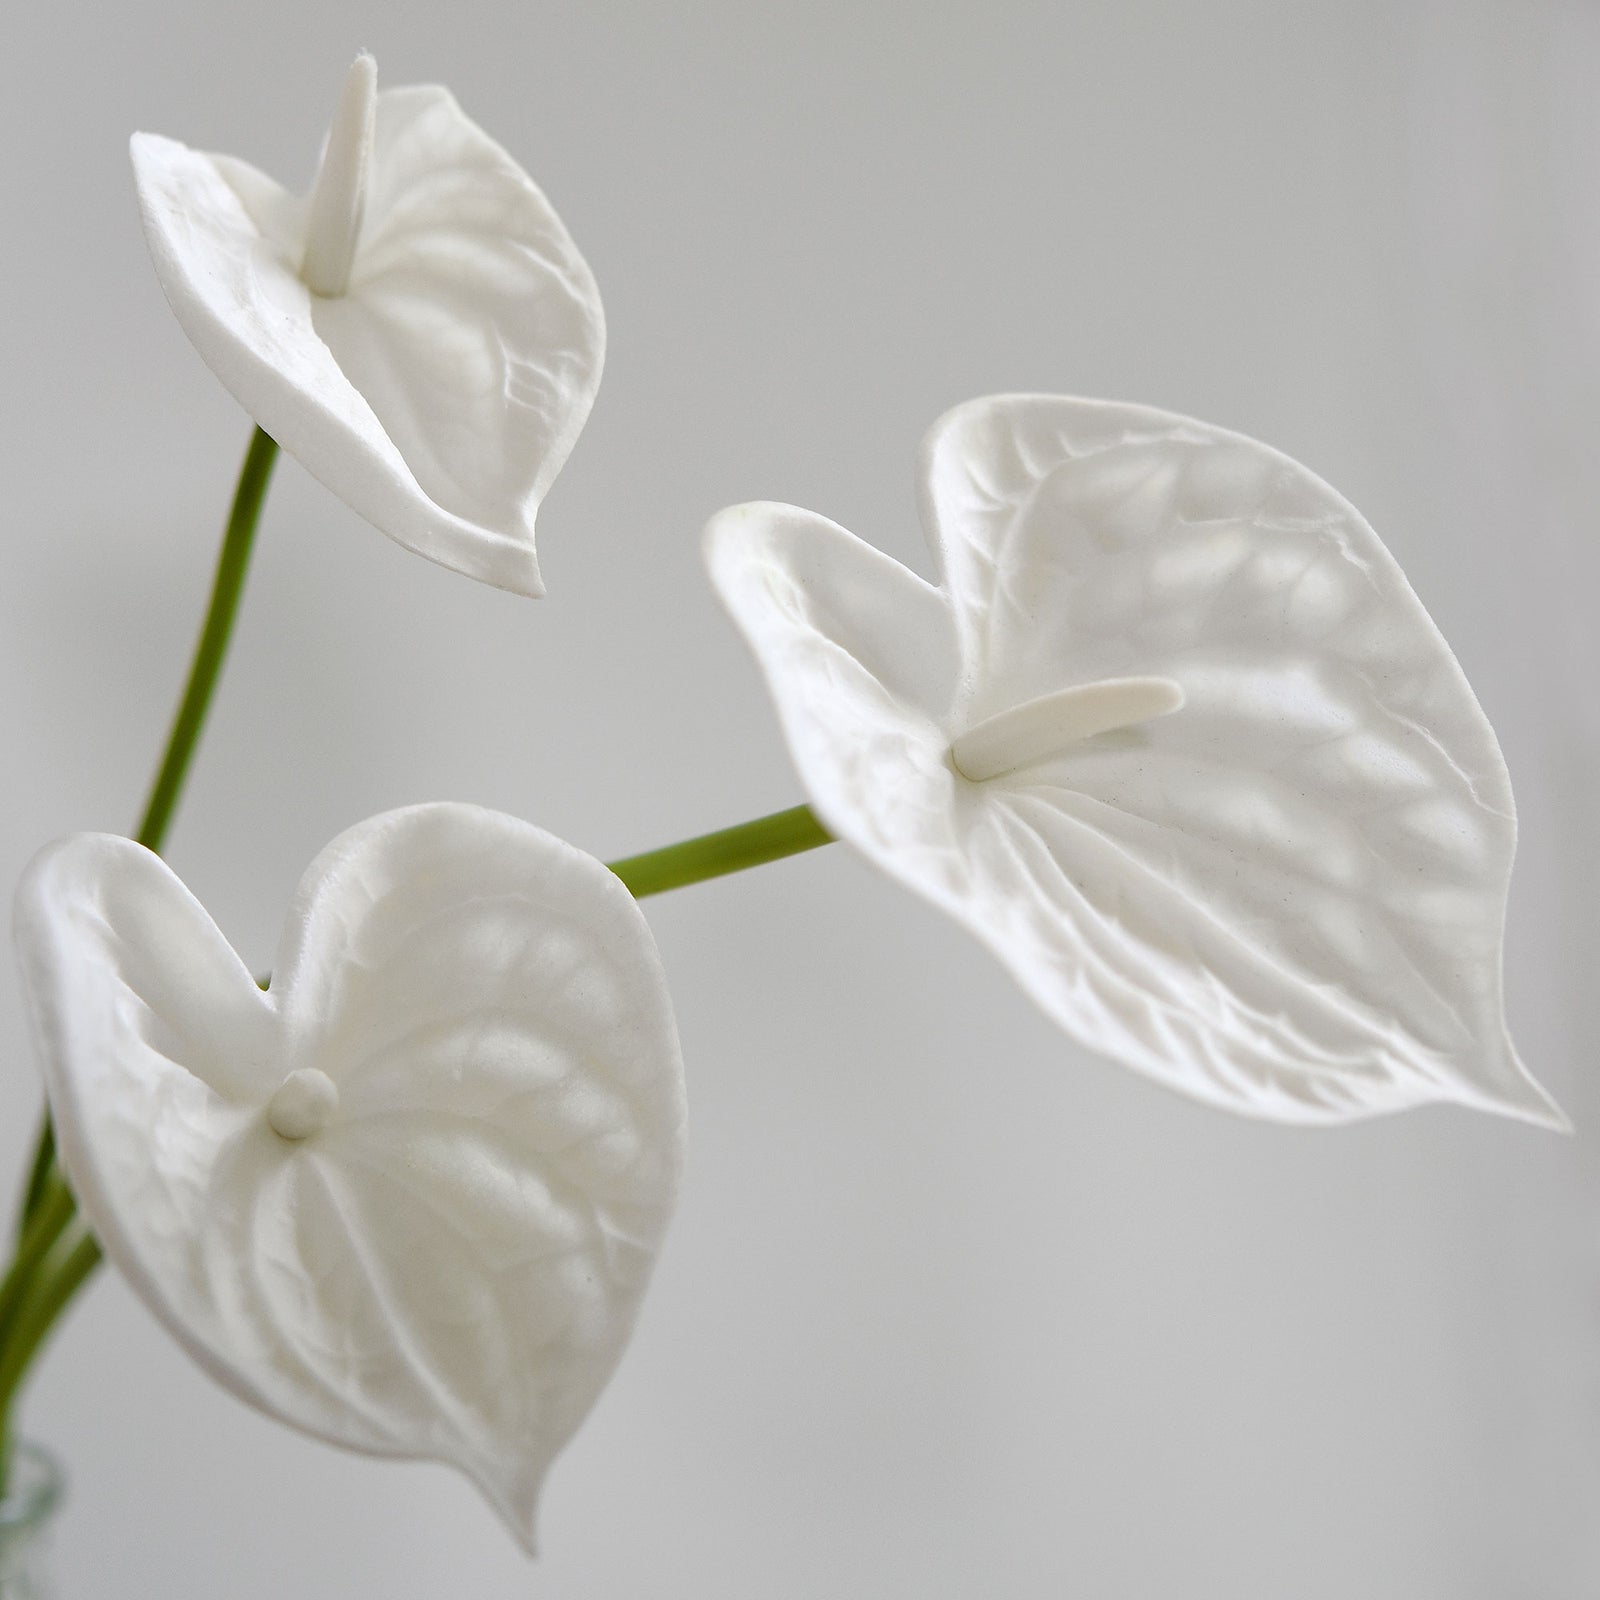 Anthurium Flower 'Seashell White' Real Touch Artificial Flowers, 16.5” 4 Stems FiveSeasonStuff Floral